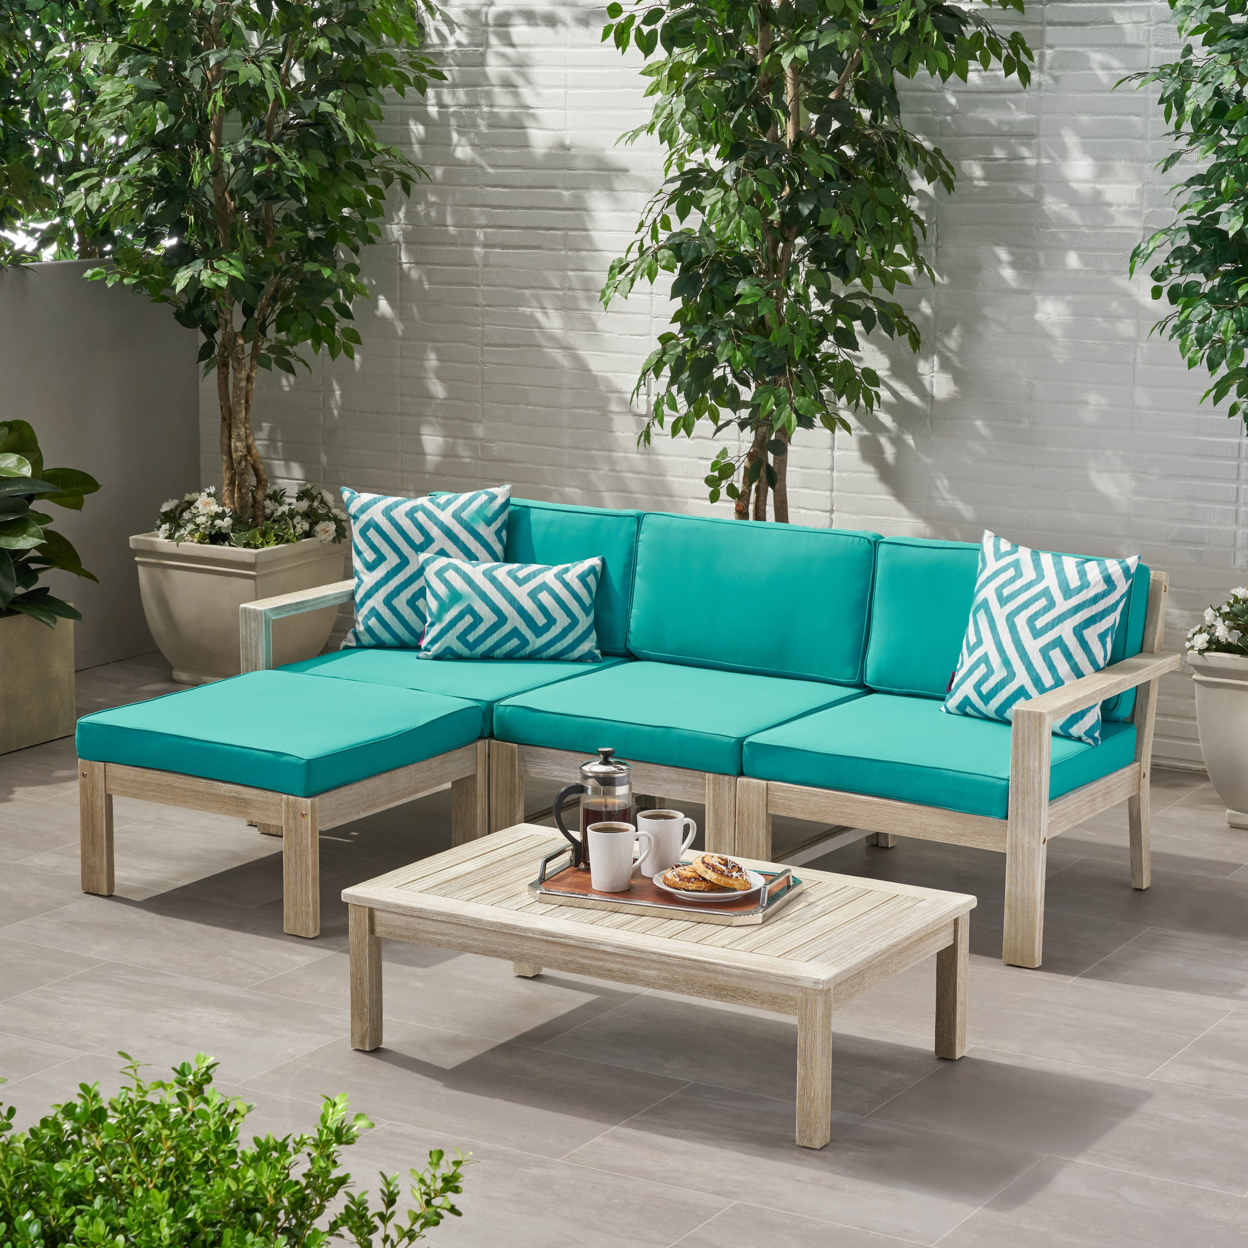 Isabella Ana Outdoor 3 Seater Acacia Wood Sofa Sectional With Cushions - Wire Brushed Light Gray Wash + Light Gray